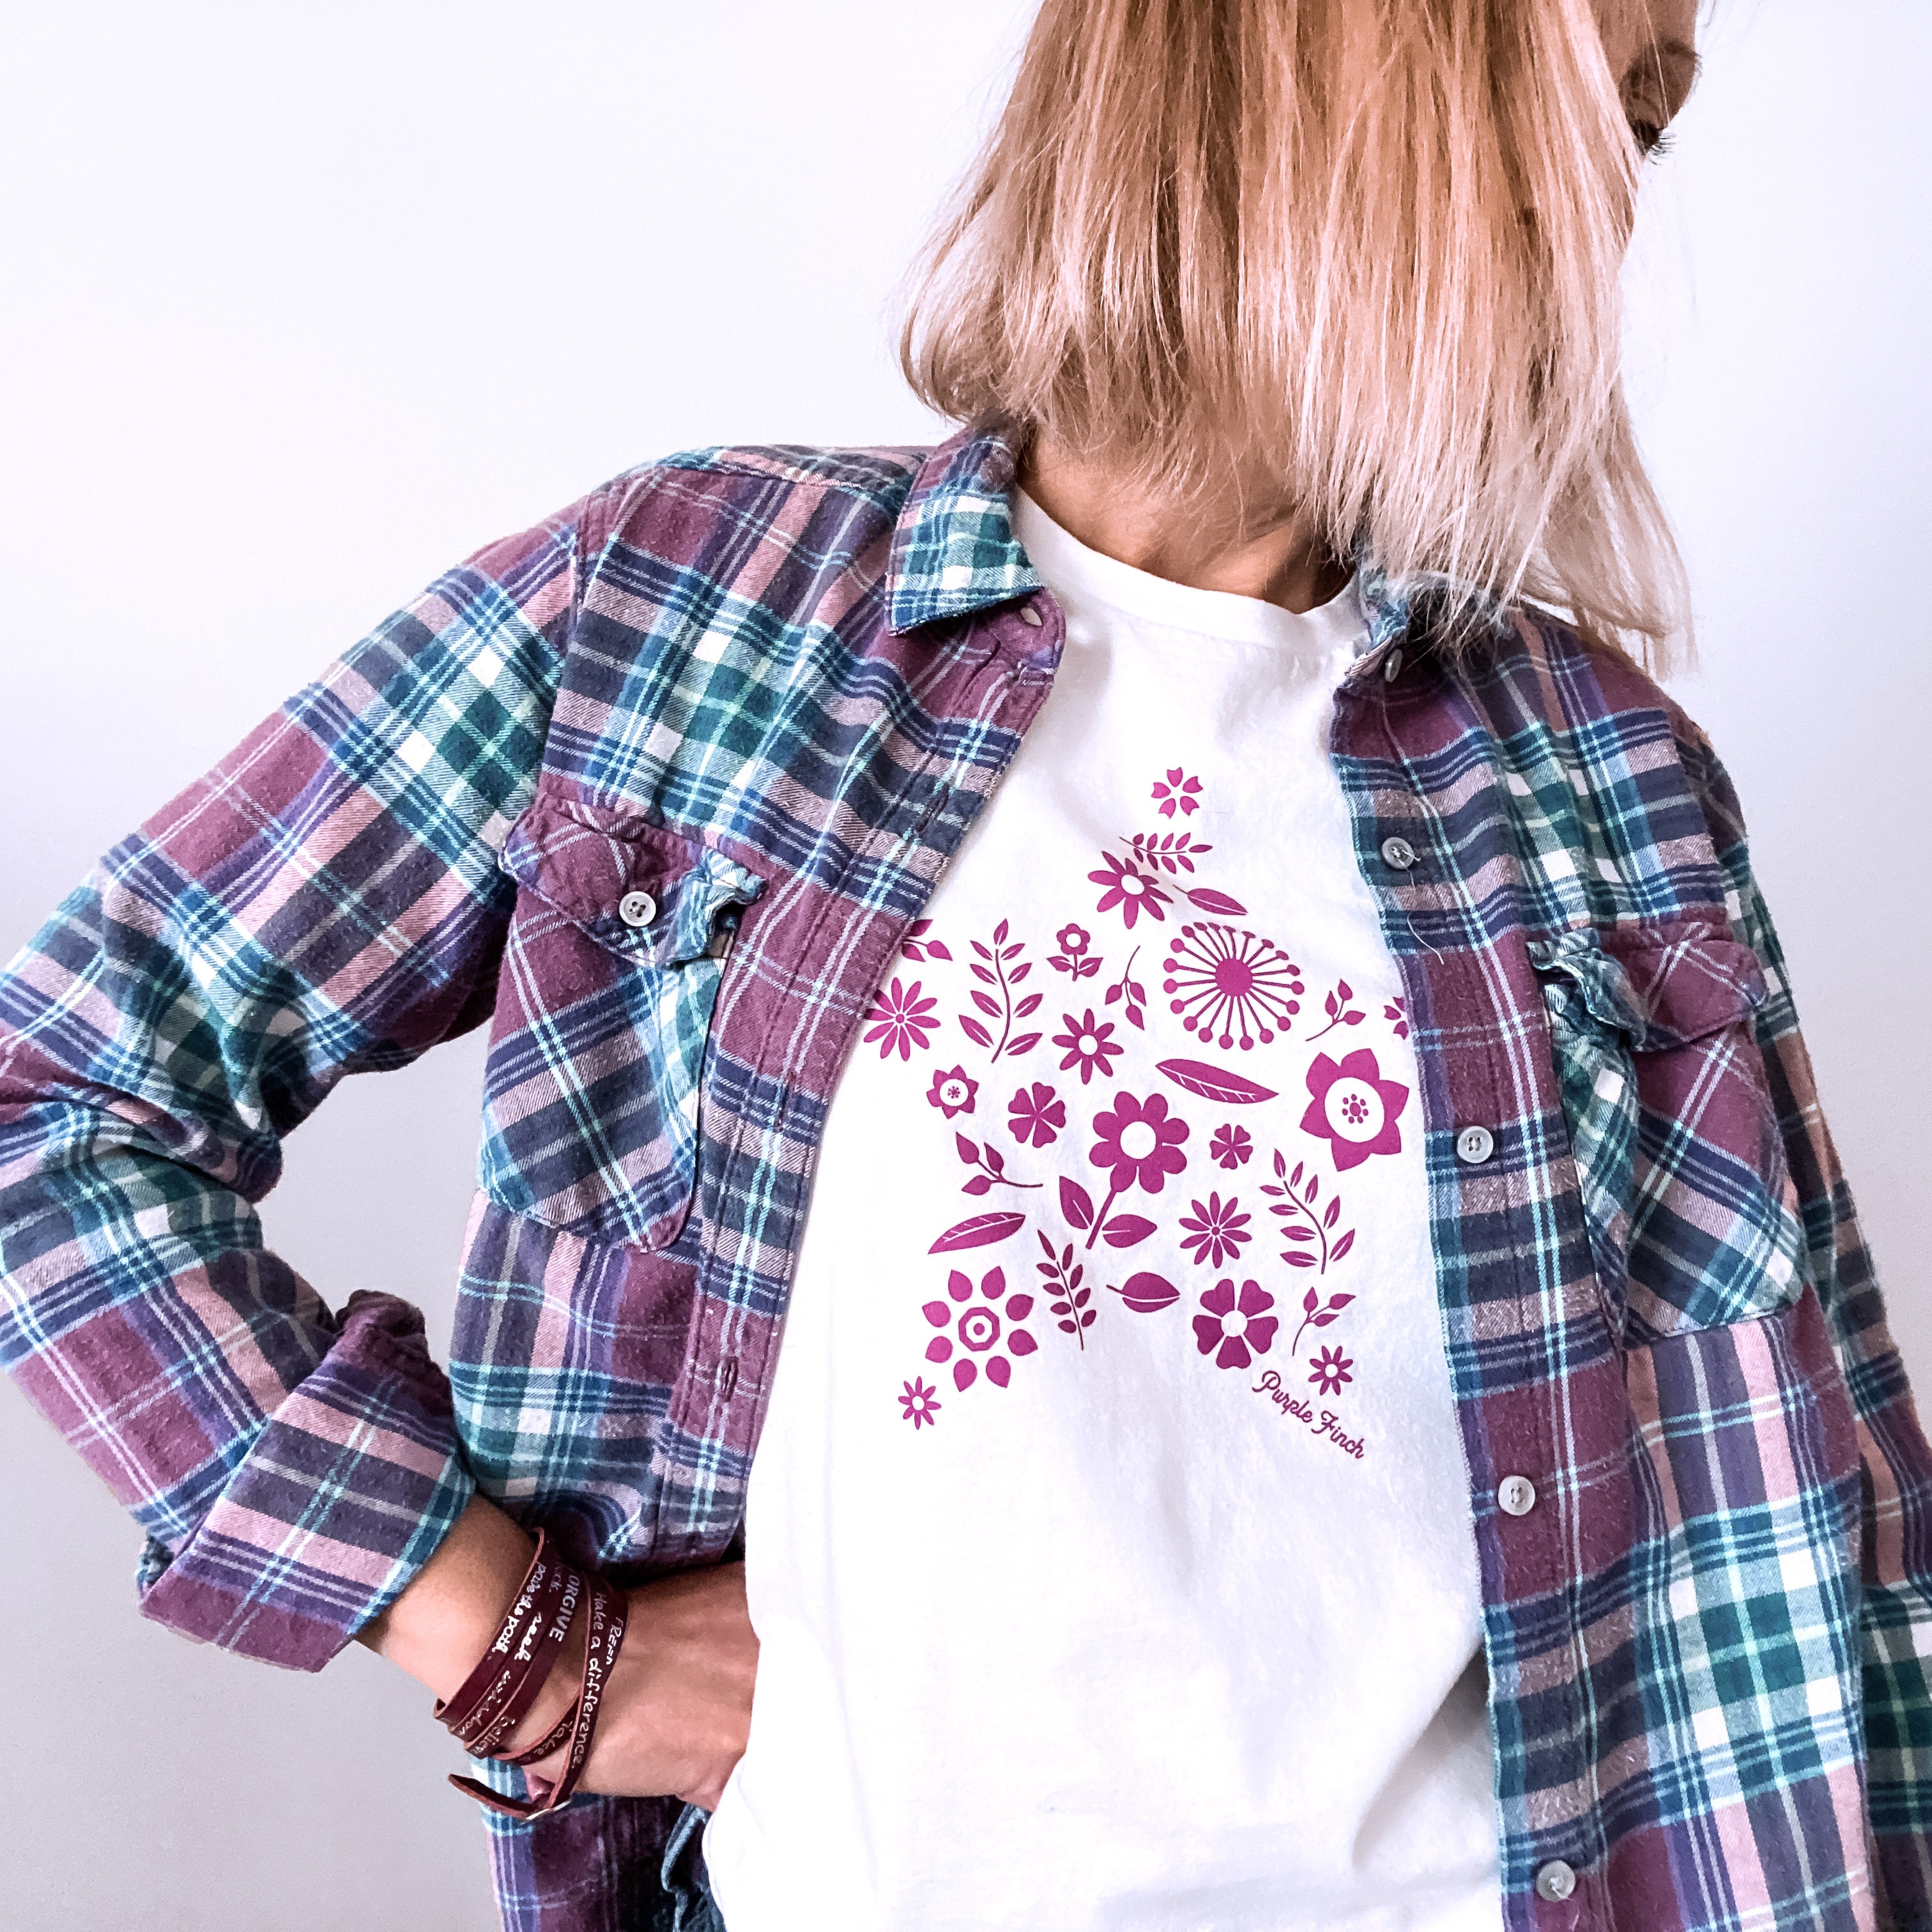 A picture of a woman wearing the star flower tee.  This white t-shirt has a magenta graphic print of a number of flowers and leaves grouped together into the shape of a star.